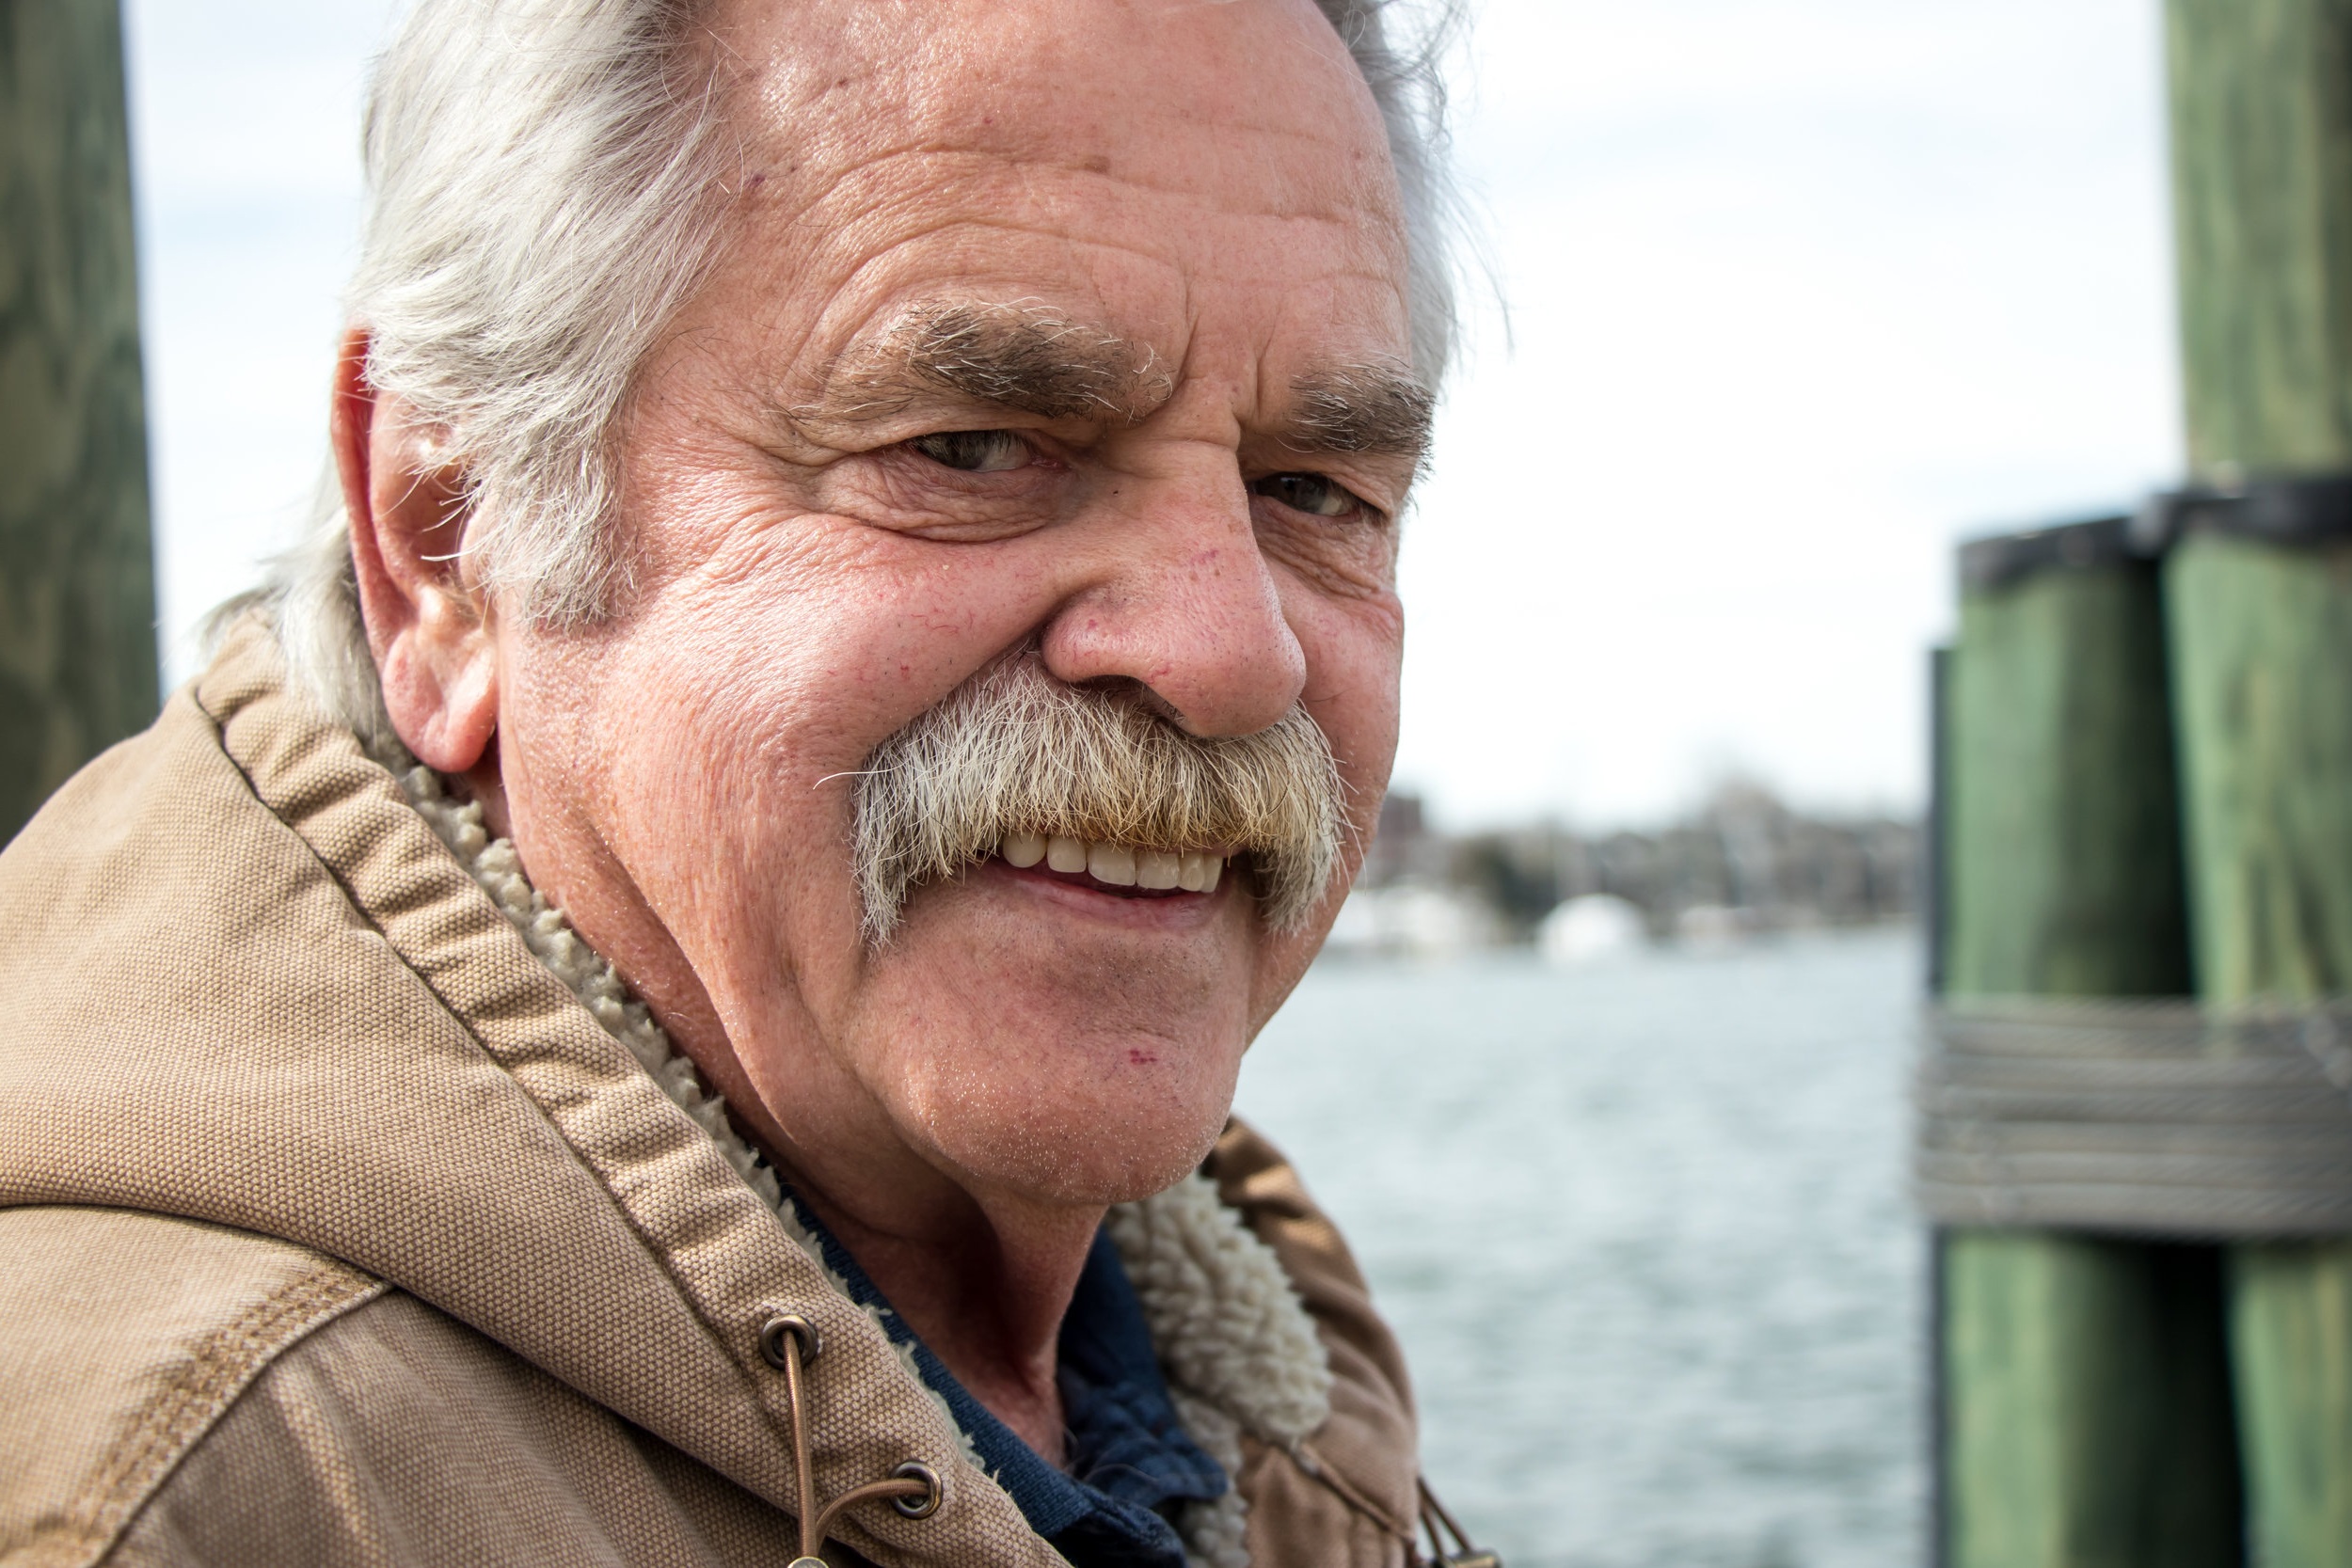 High-Kick-Photography-Environmental-Portrait-Annapolis-Maryland-Outdoors-Man-with-Mustache-LR-1.jpg